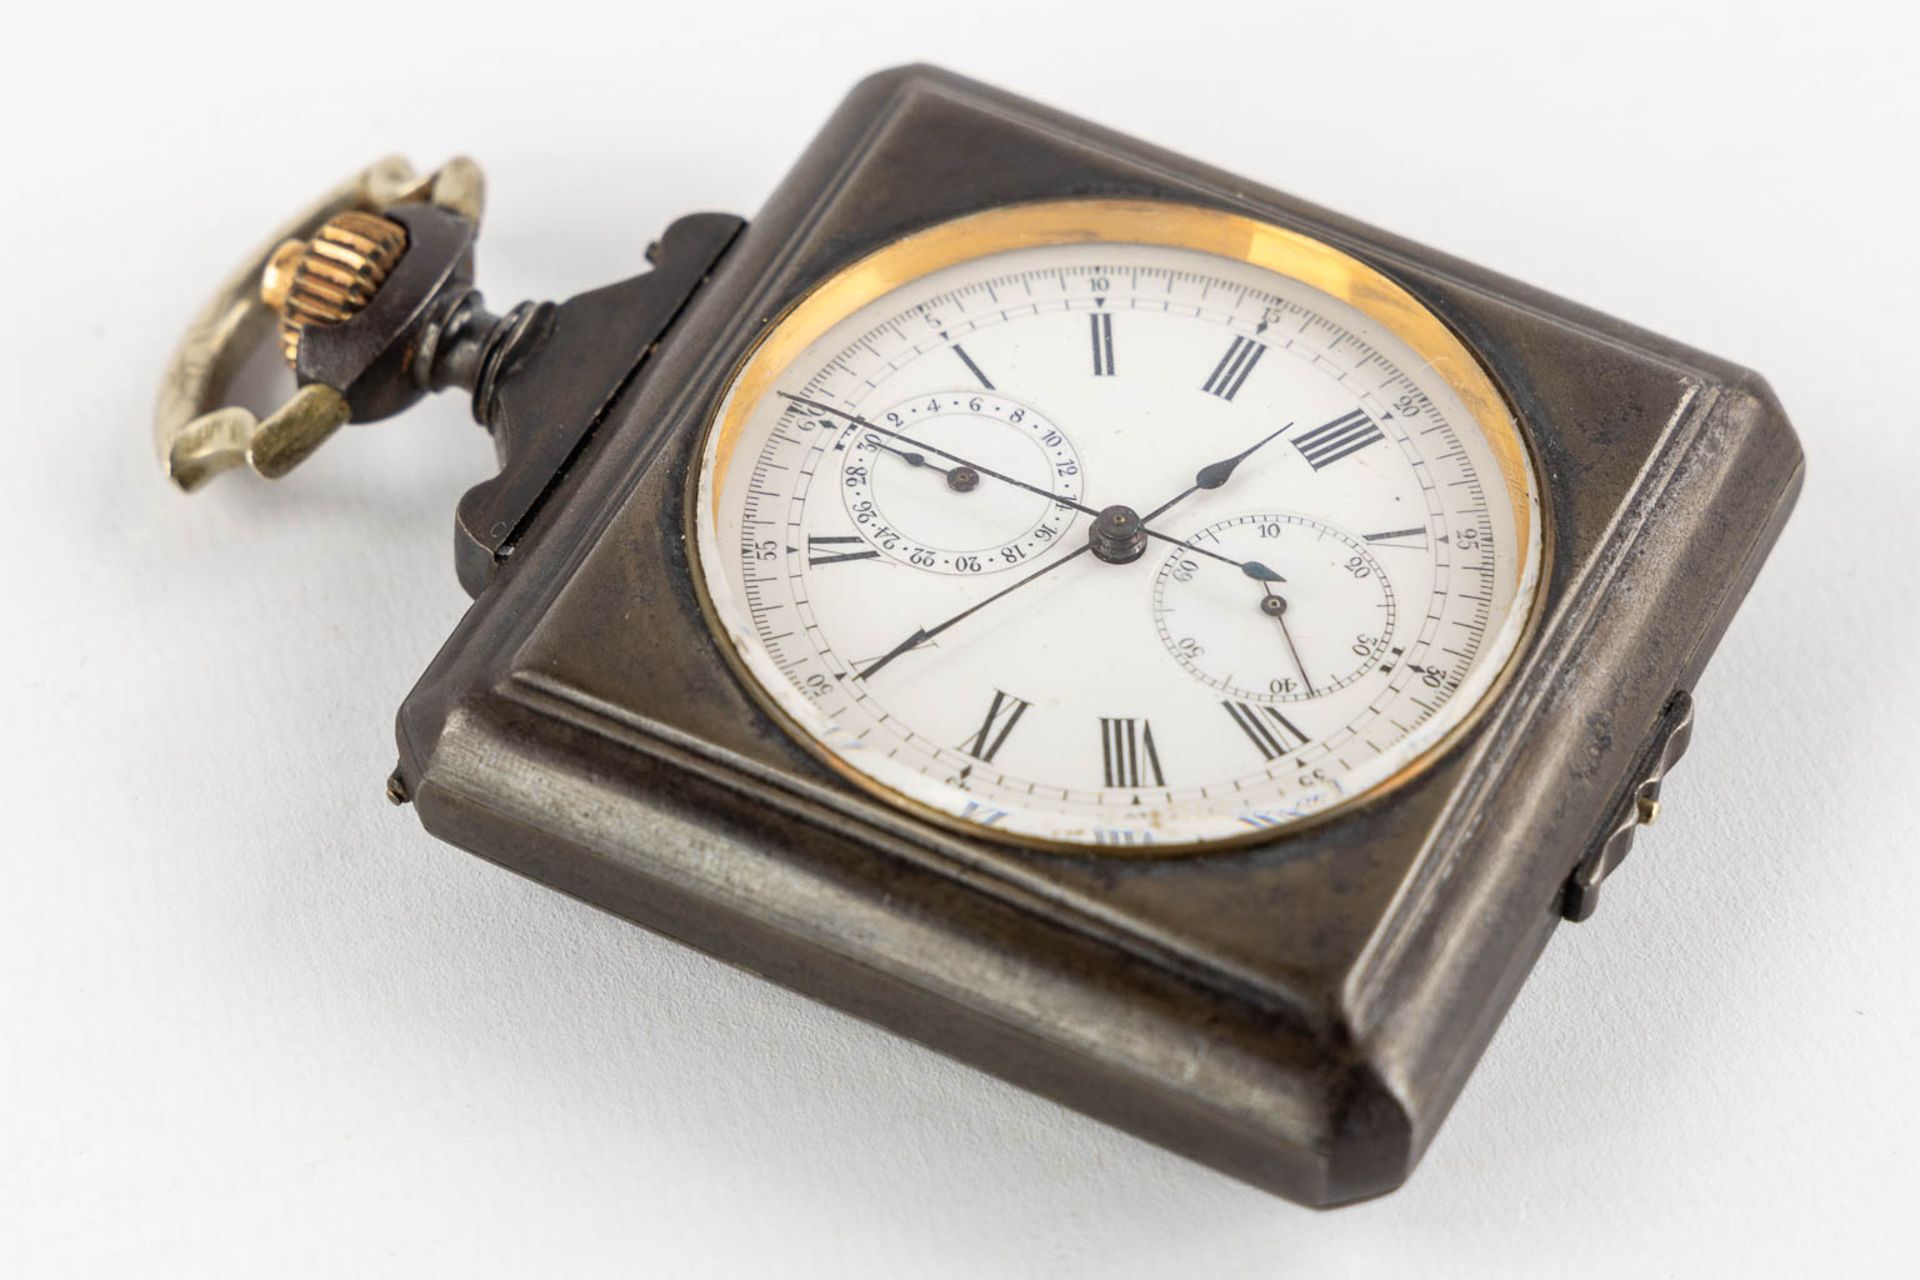 An antique 'Chronograph' pocket watch, first half of the 20th C. (W:6,4 x H:10 cm) - Image 4 of 11